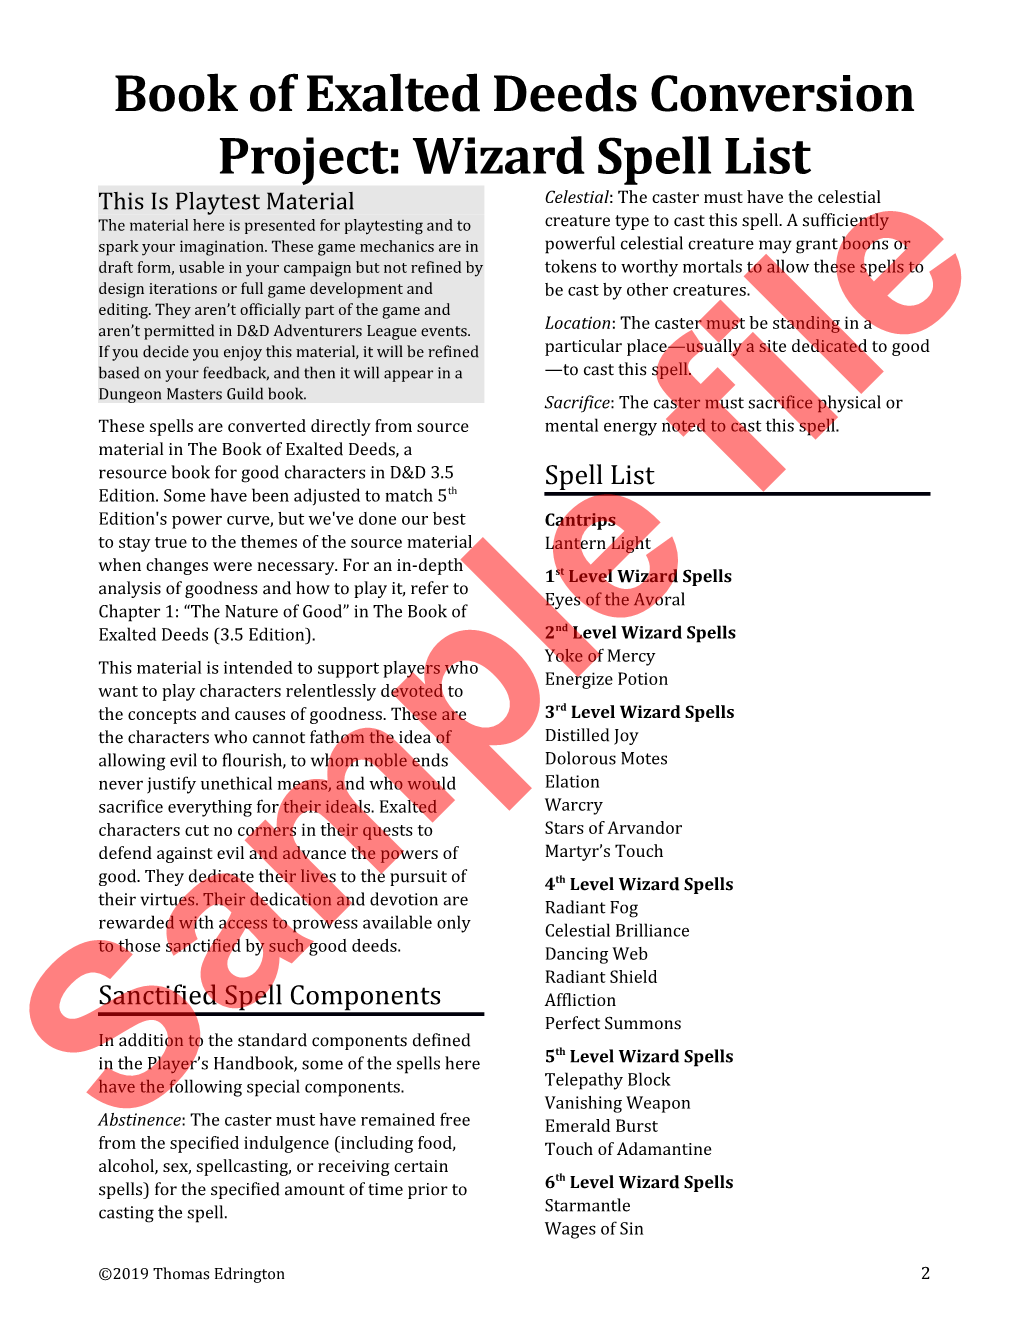 Book of Exalted Deeds Conversion Project: Wizard Spell List